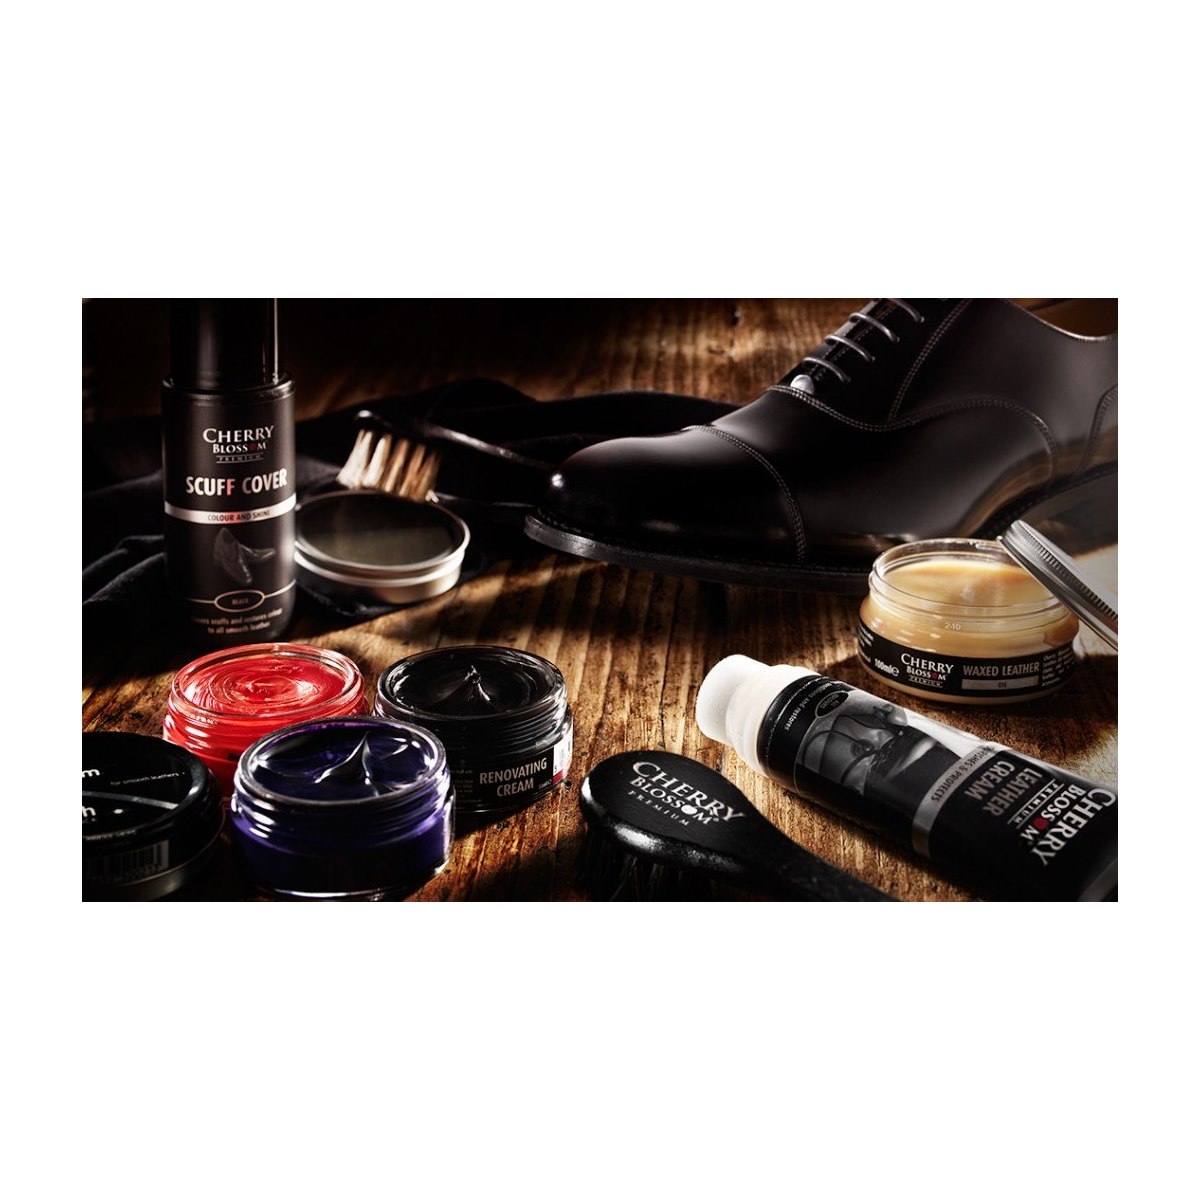 Cherry Blossom Shoe Care Products